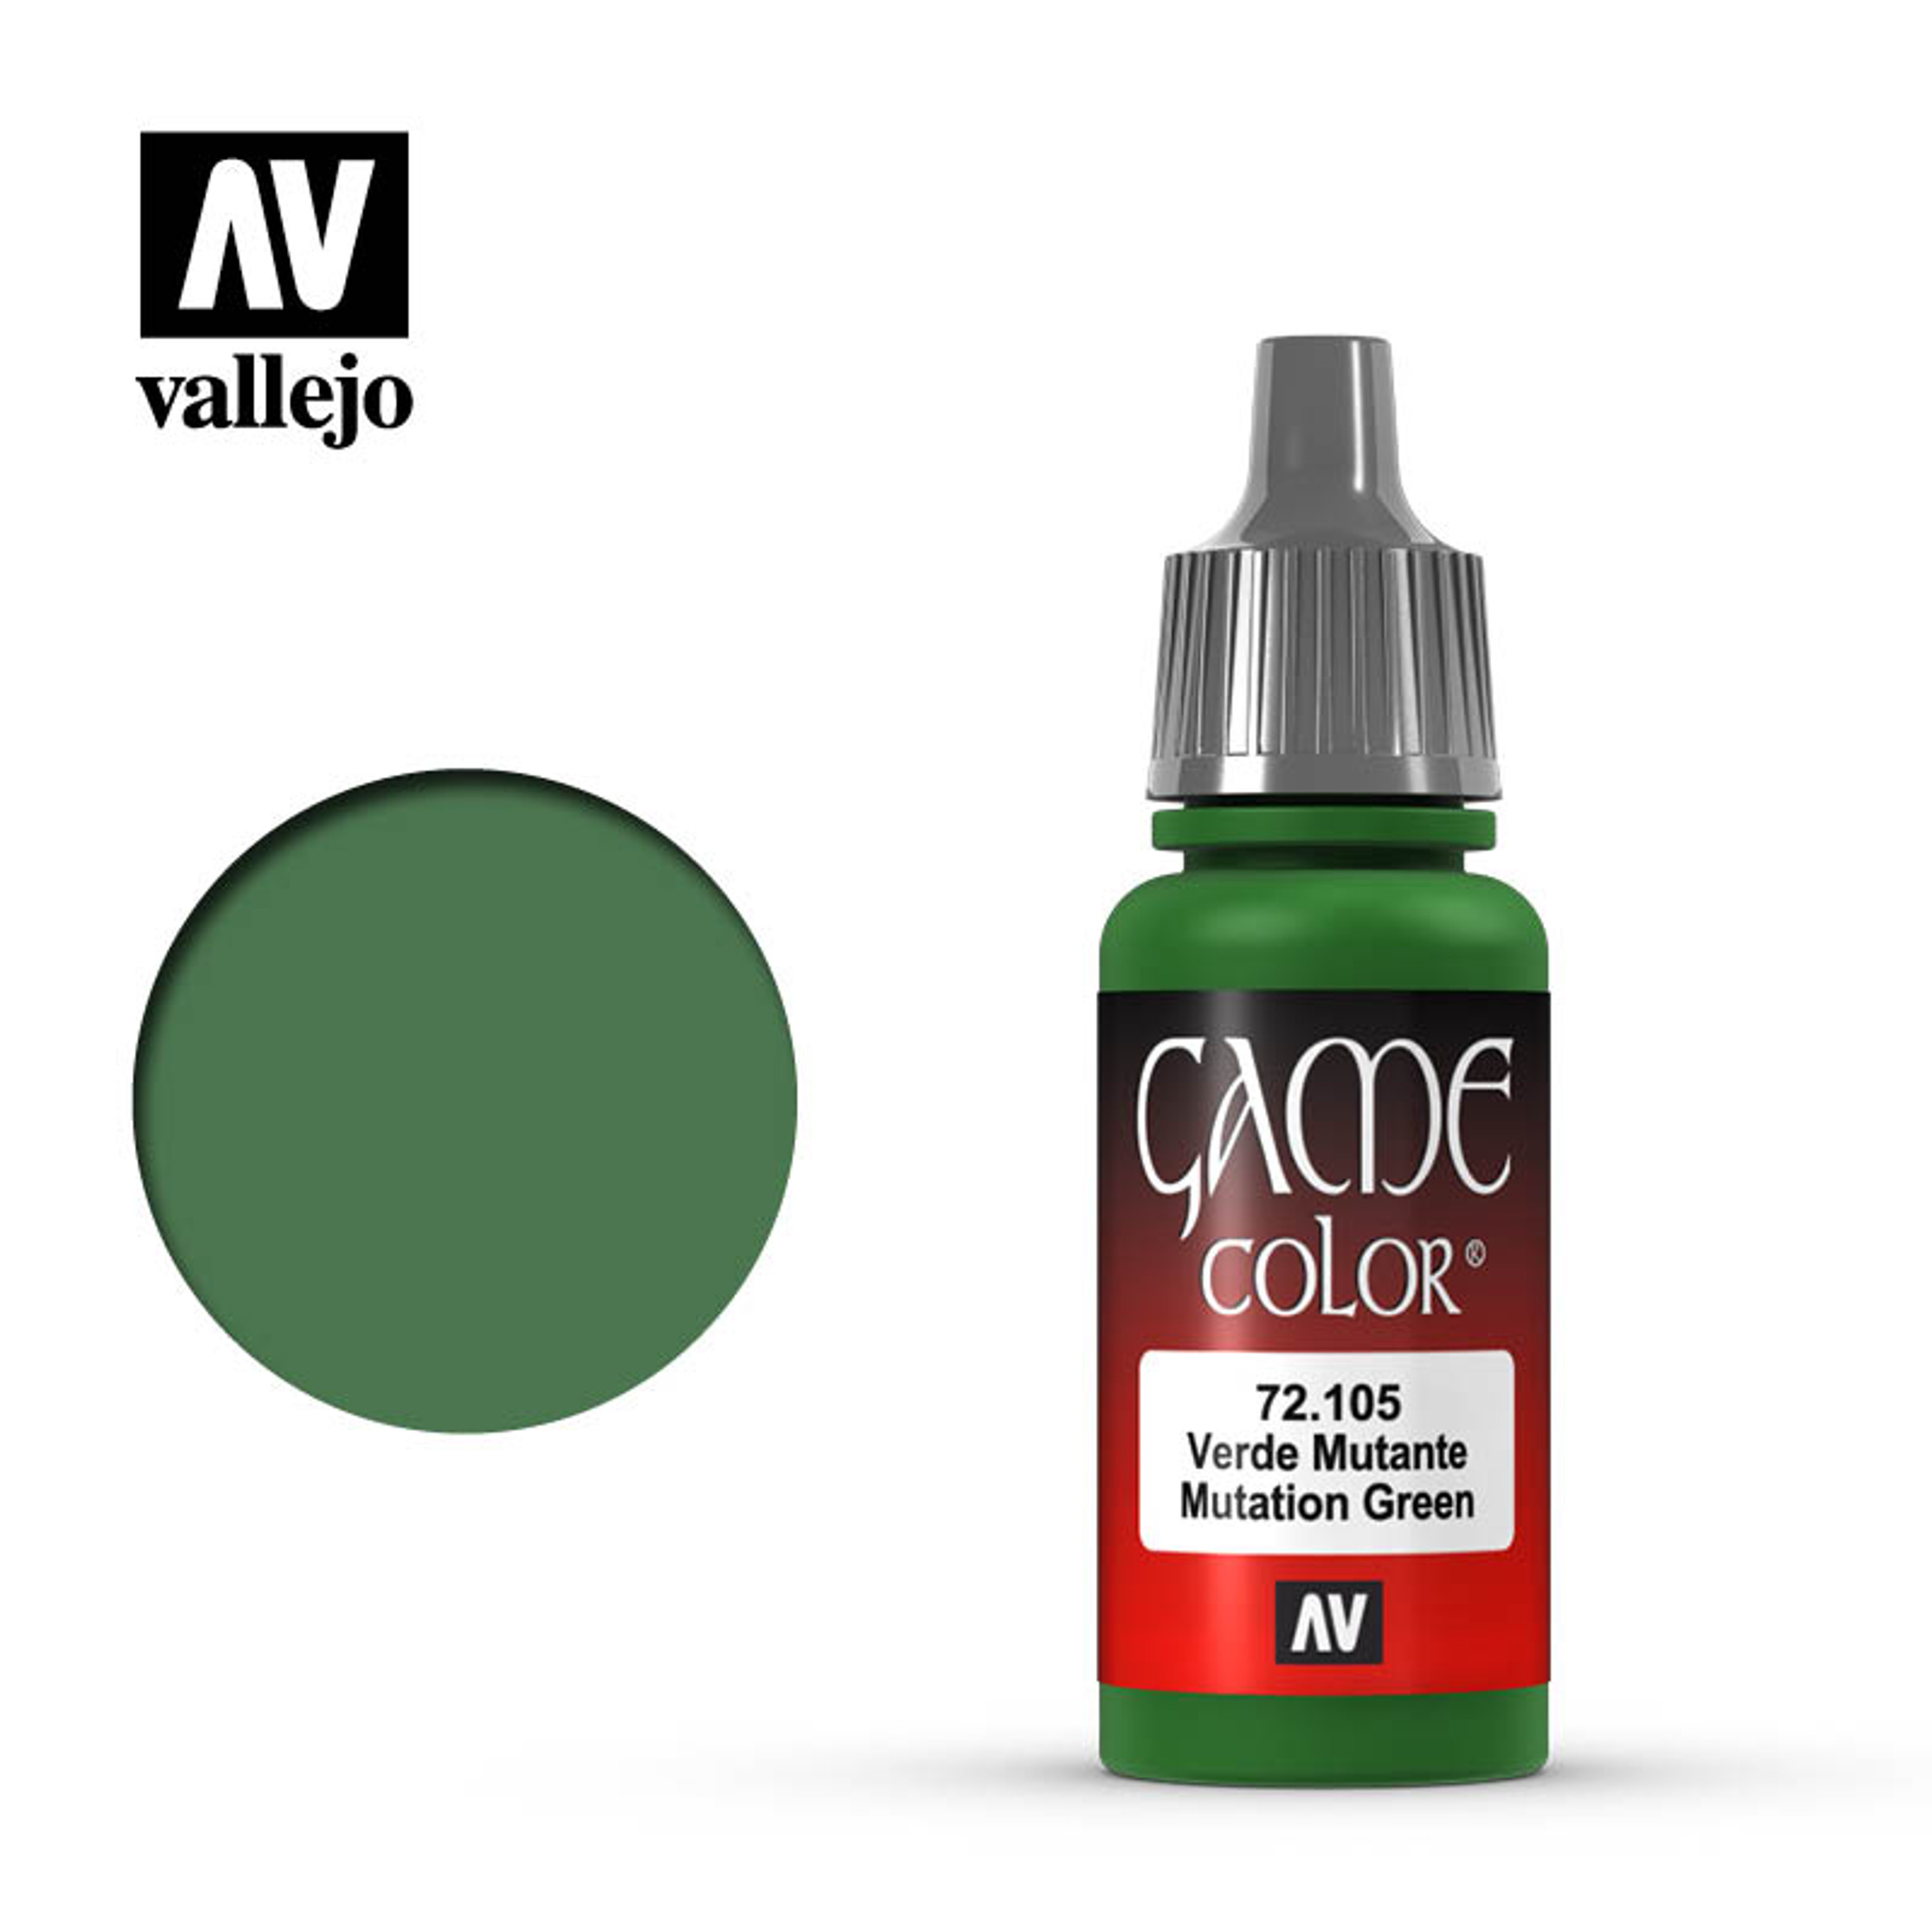 vallejo-game-color-17ml-mutation-green-72-105